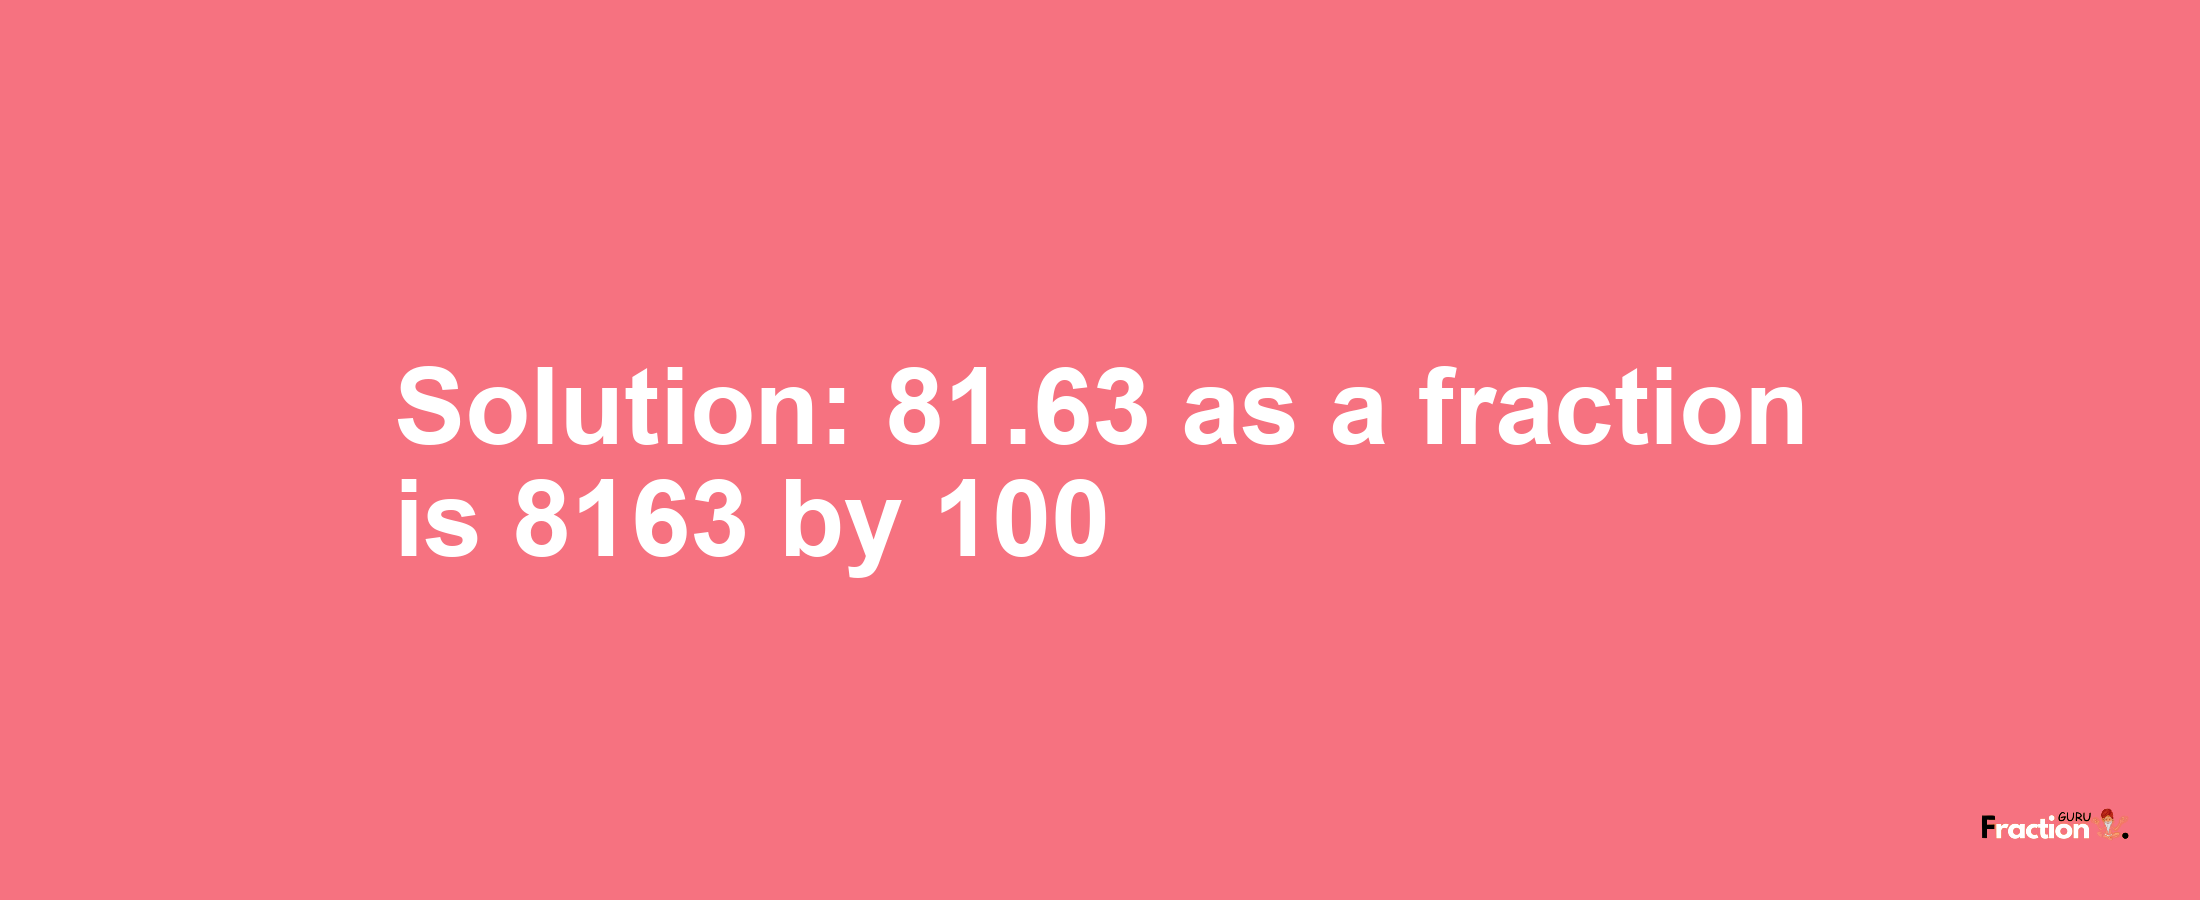 Solution:81.63 as a fraction is 8163/100